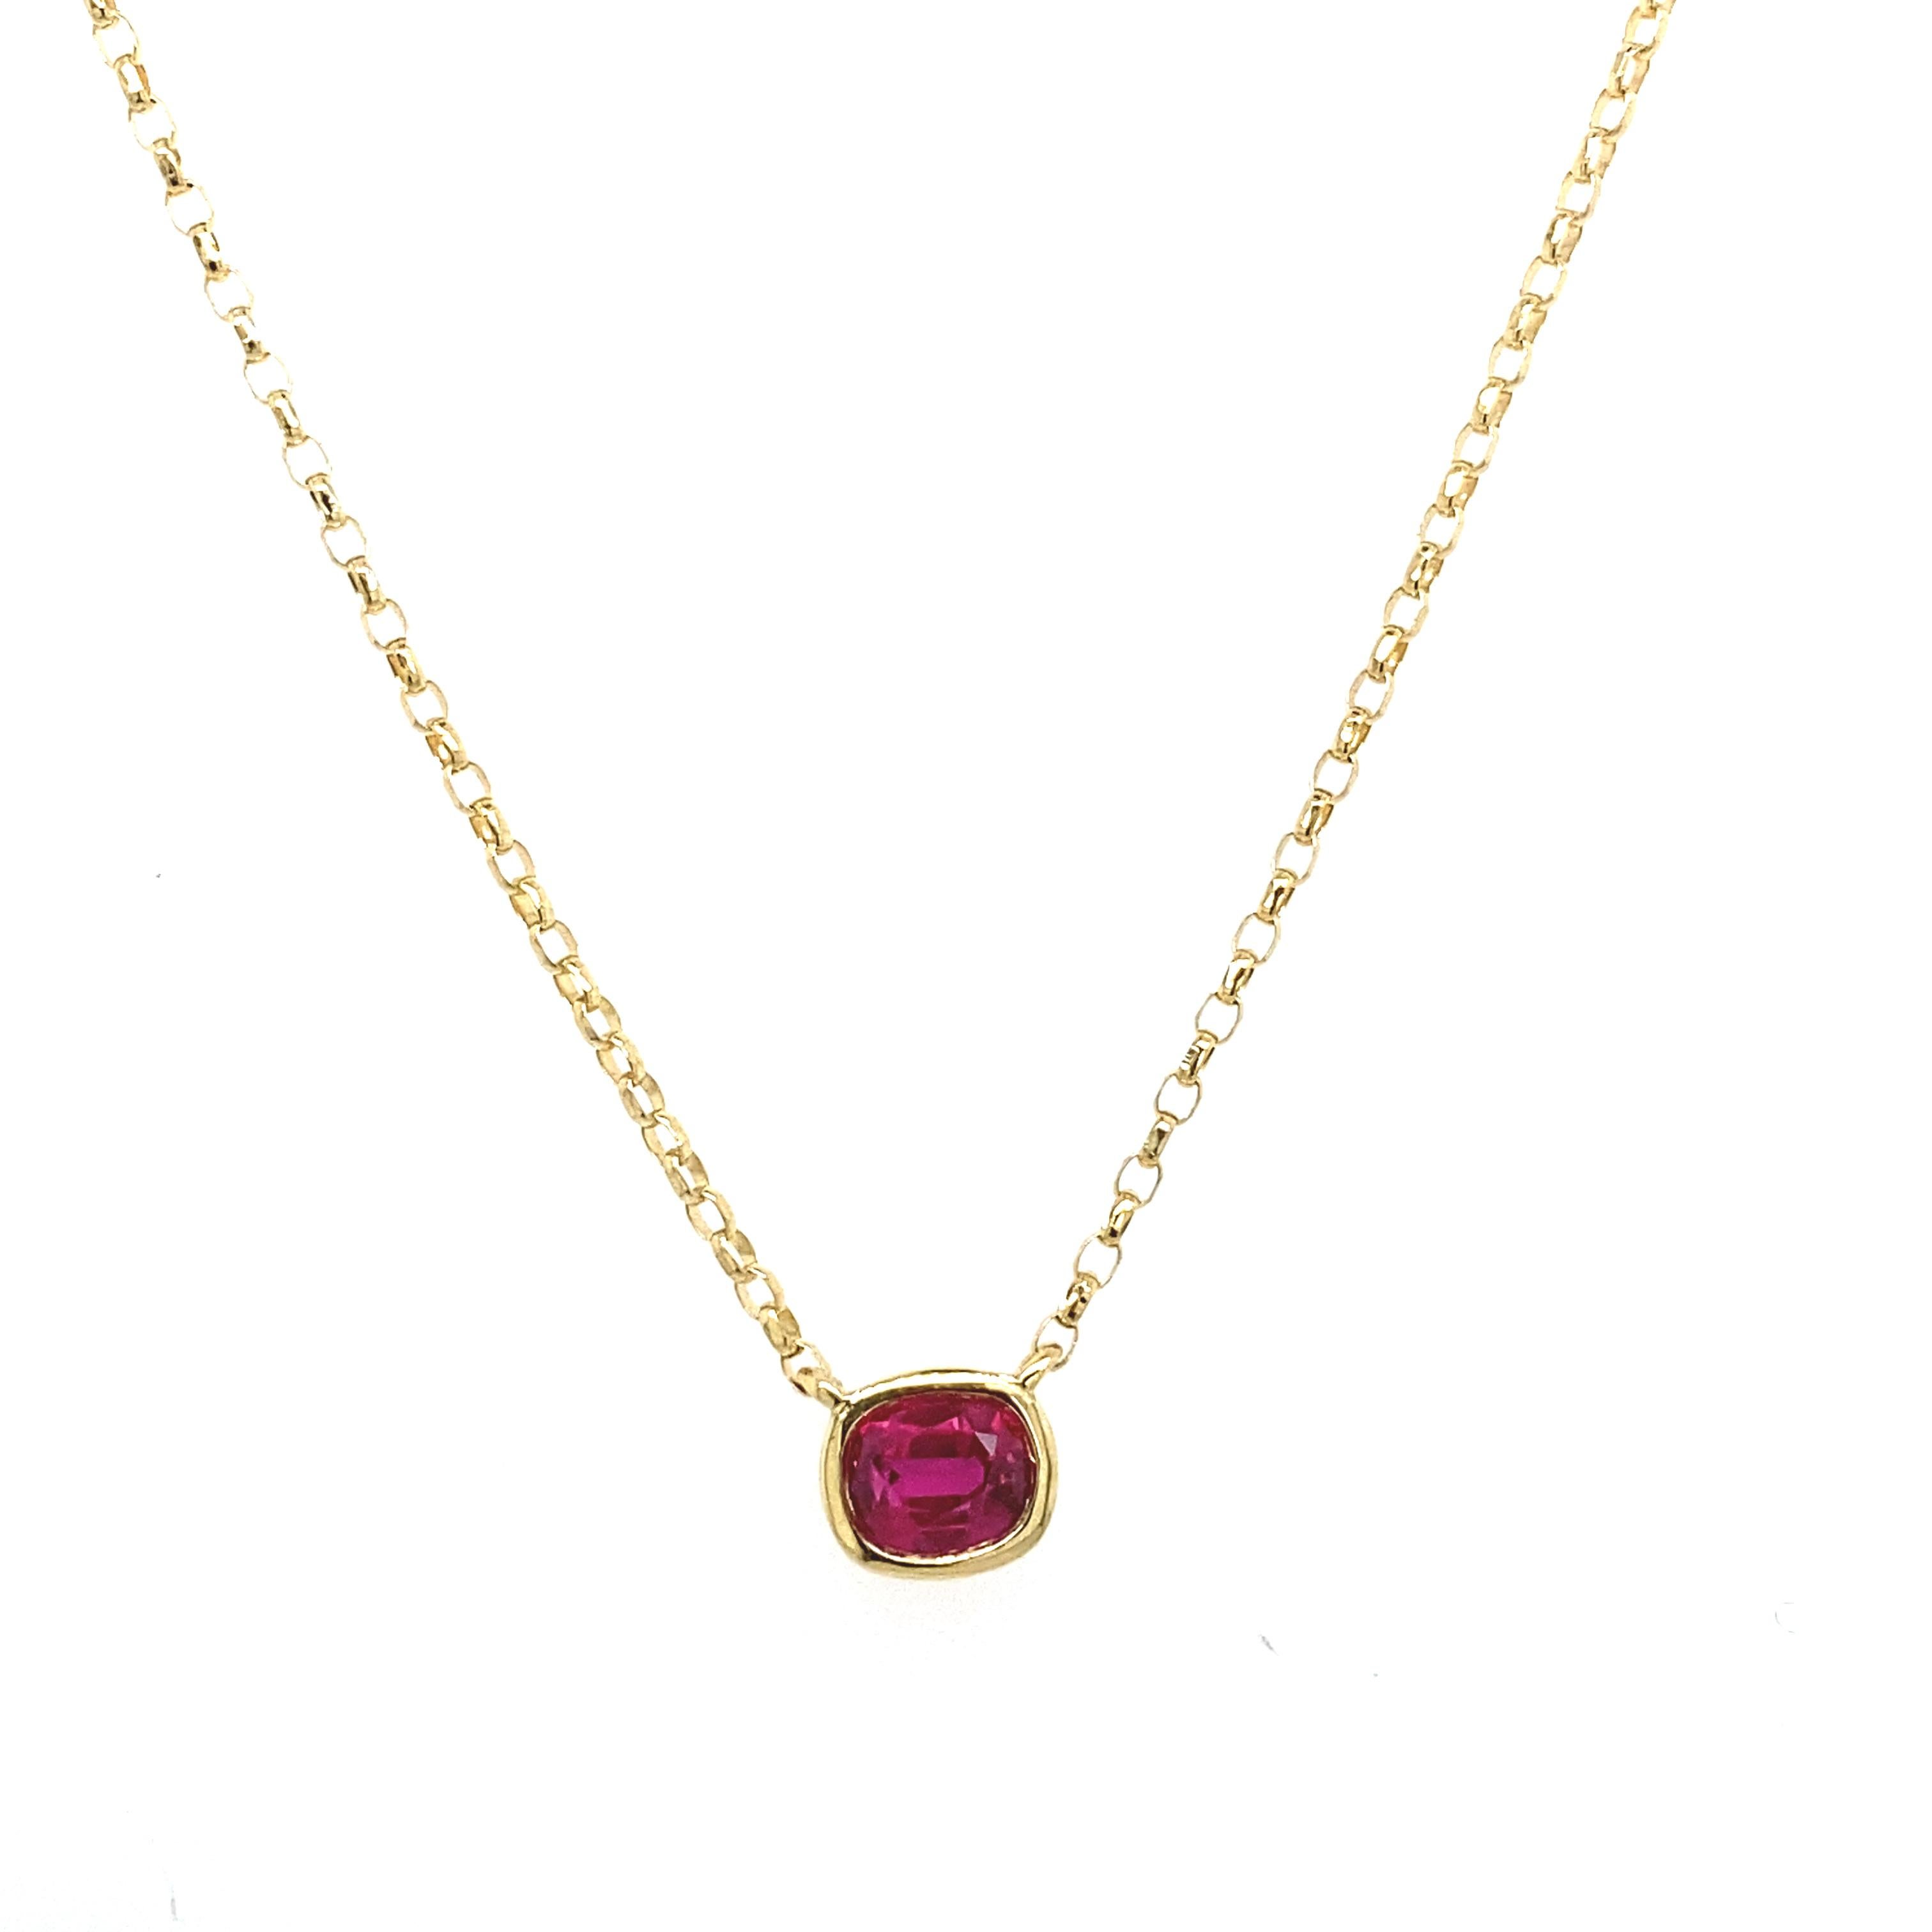 0.41ct Cushion Shape Ruby Pendant Set in 18ct Yellow Gold In New Condition For Sale In London, GB